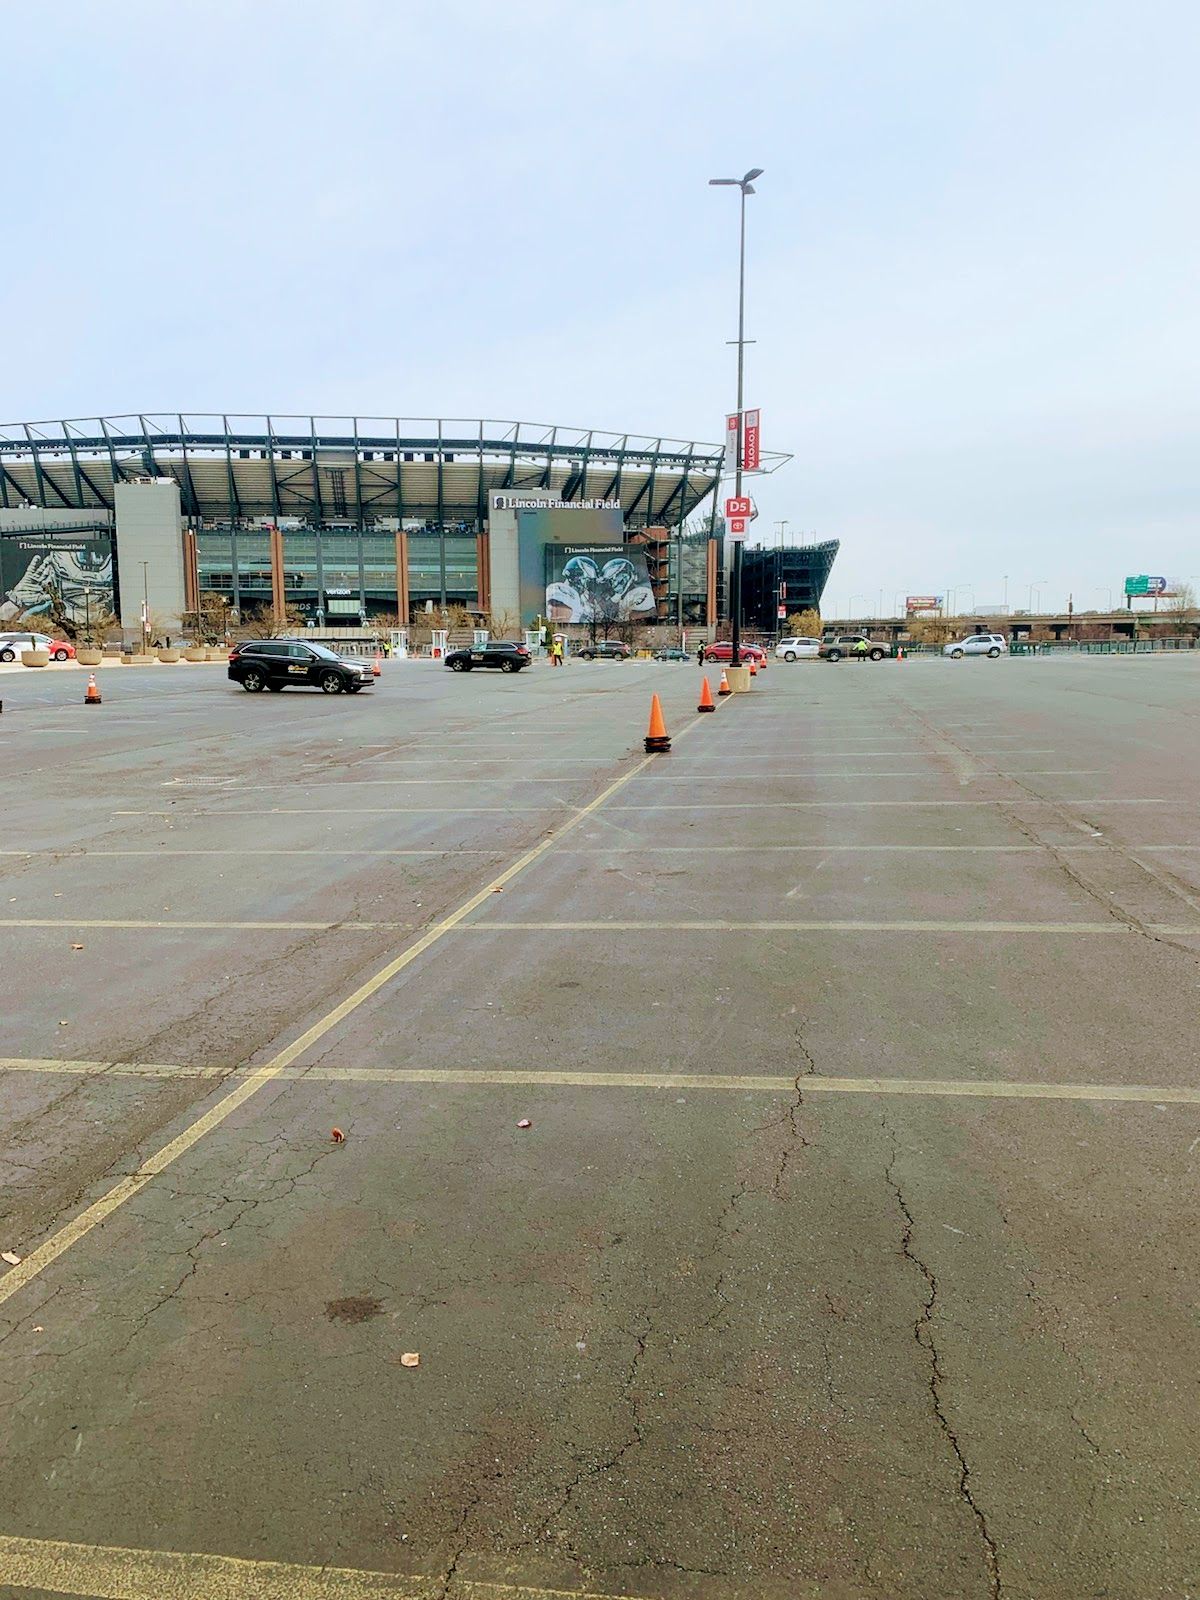 Use cones to block off parking spots for Philadelphia Eagles tailgating.